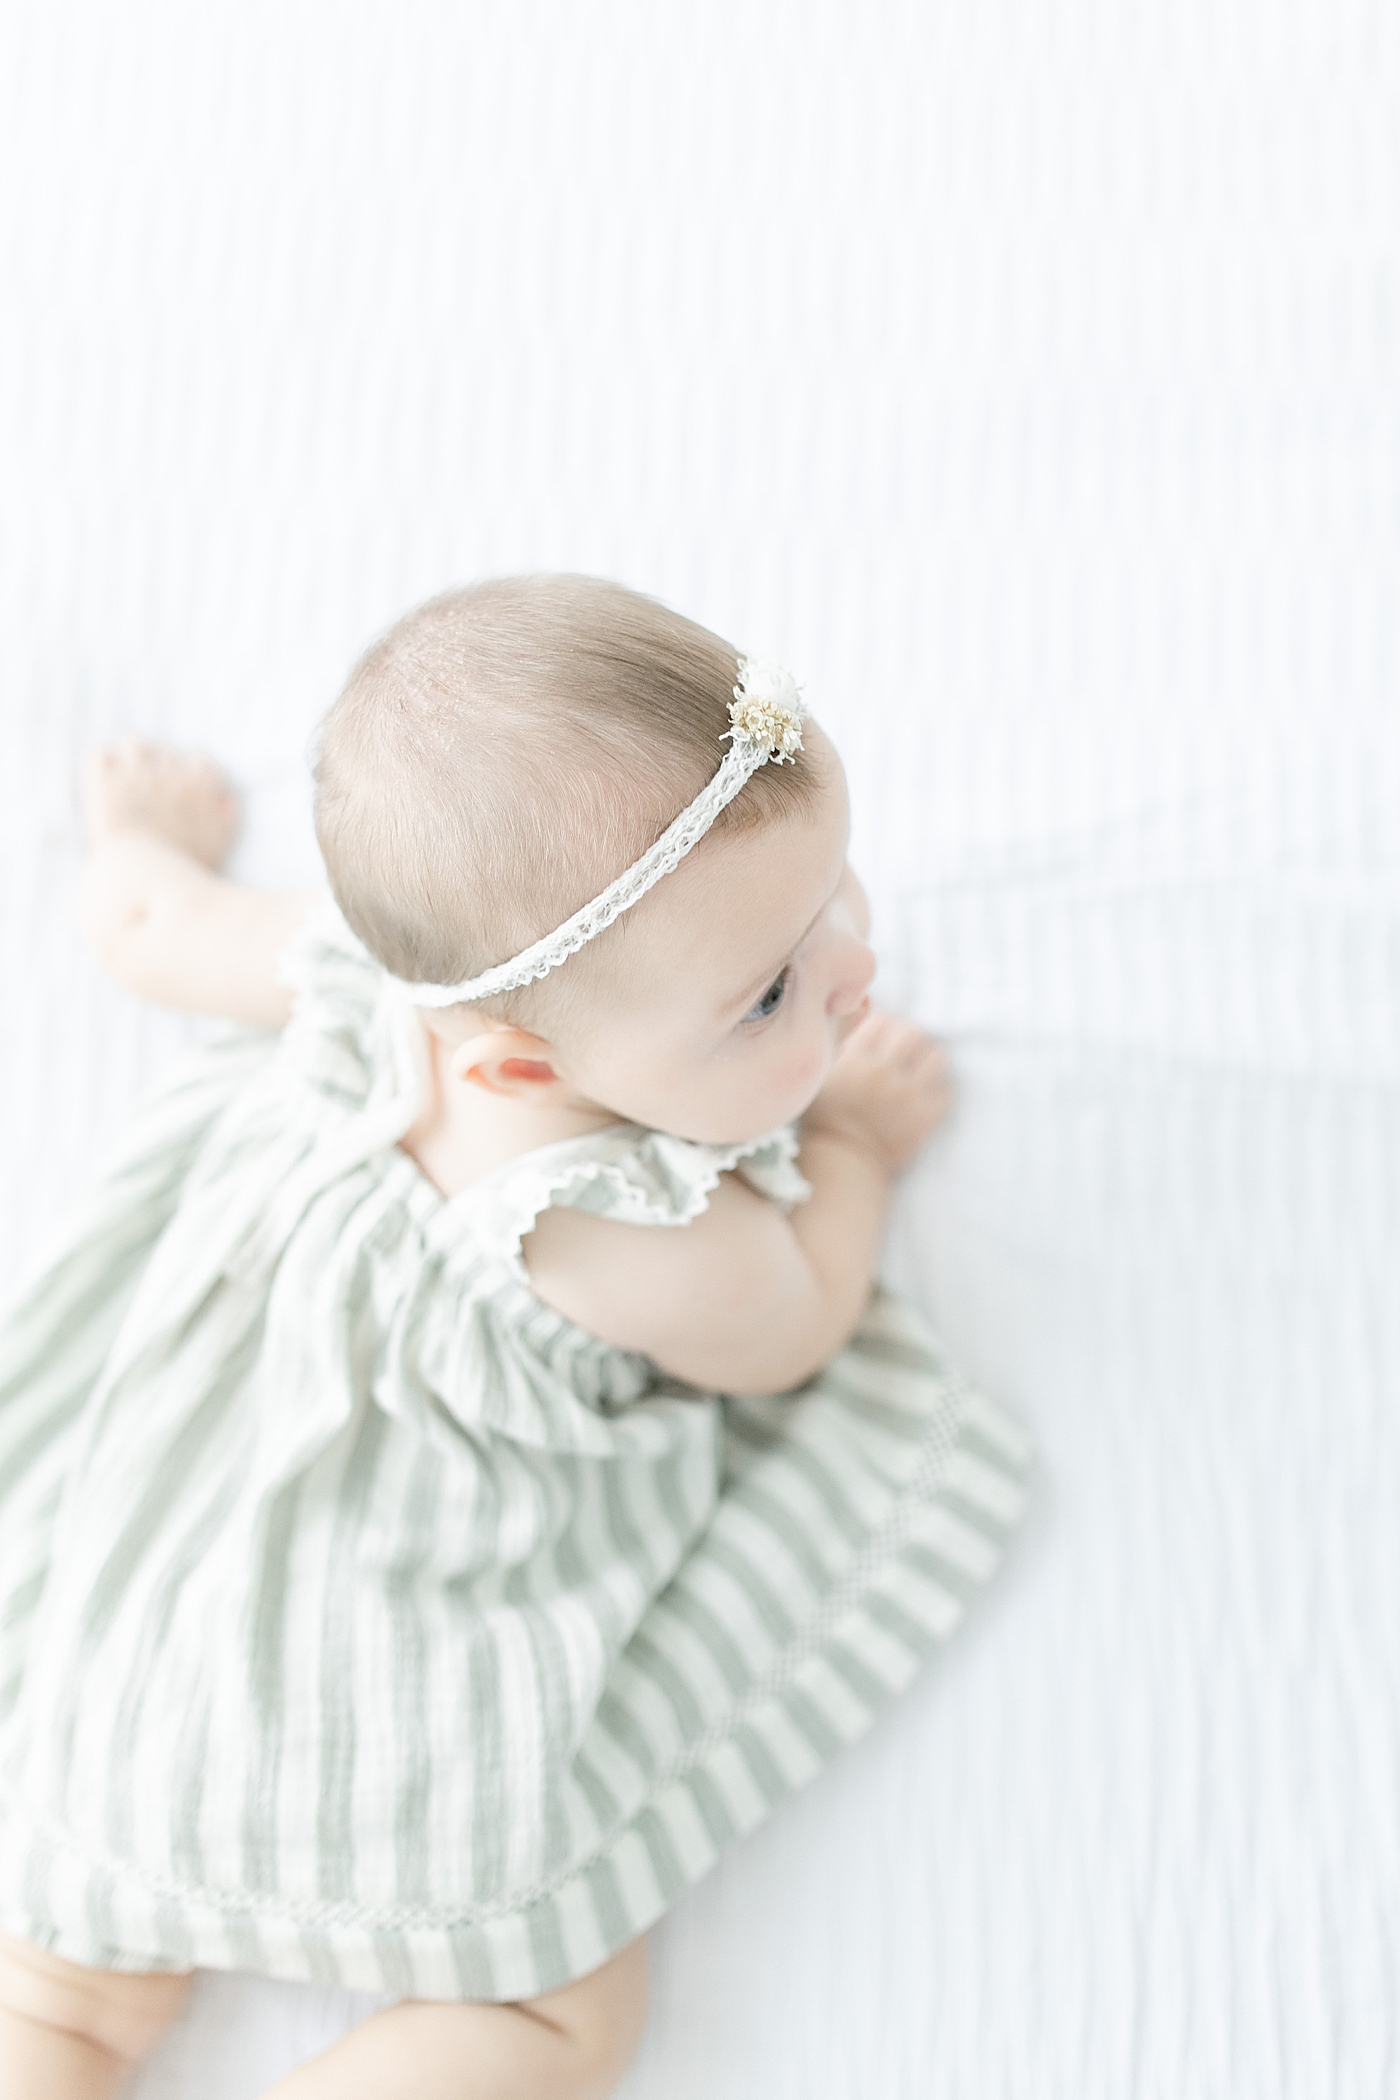 Details from above of baby girl in striped dress with headband | Photo by Little Sunshine Photography